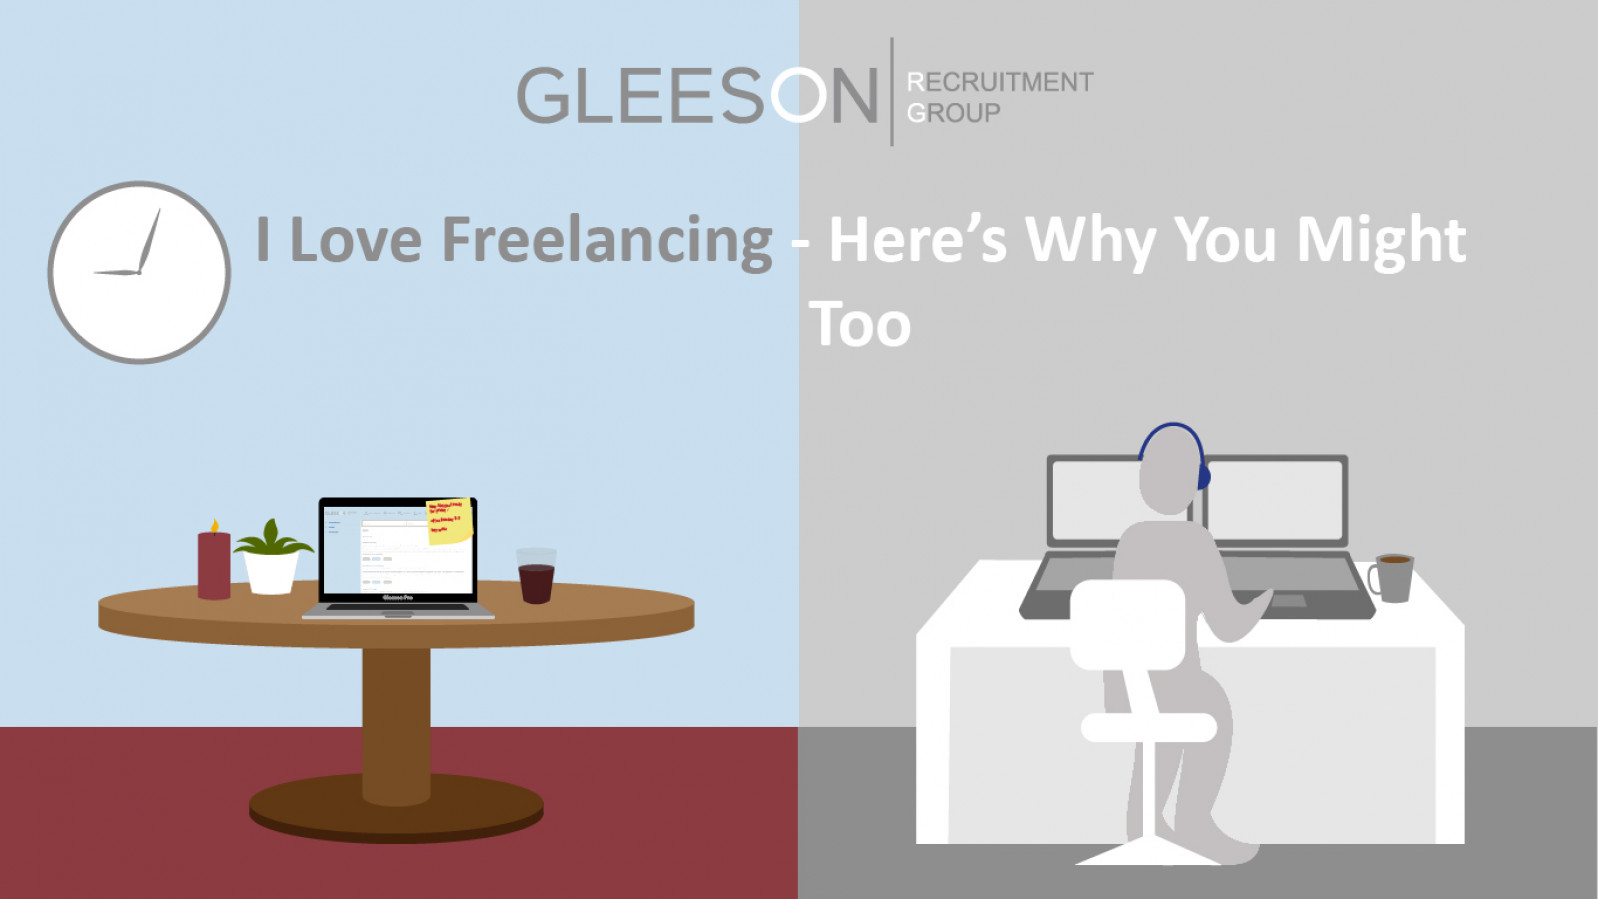 I Love Freelancing - Here's Why You Might Too